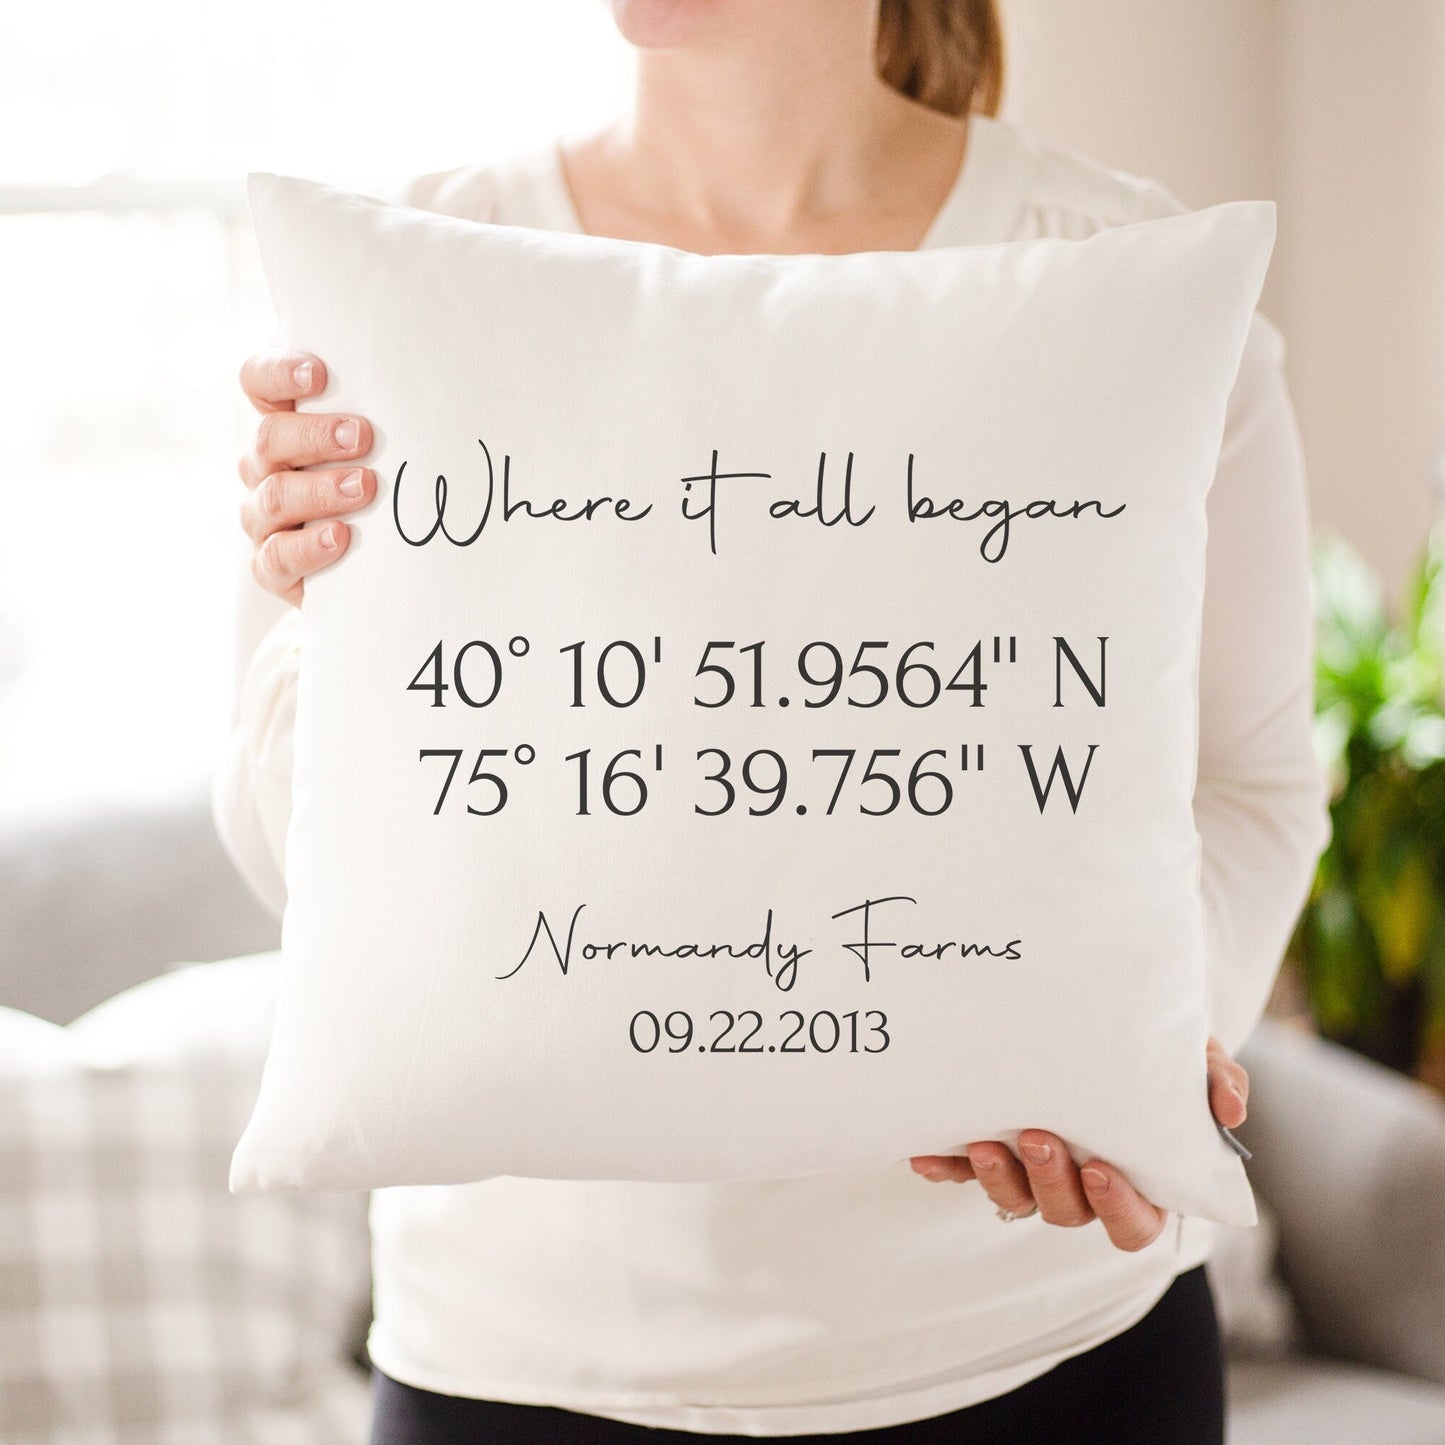 First Home Gift for Couple | Personalized Housewarming Gifts | New Home | First Home Gift | Home | Personalized Coordinates Gift | GPS